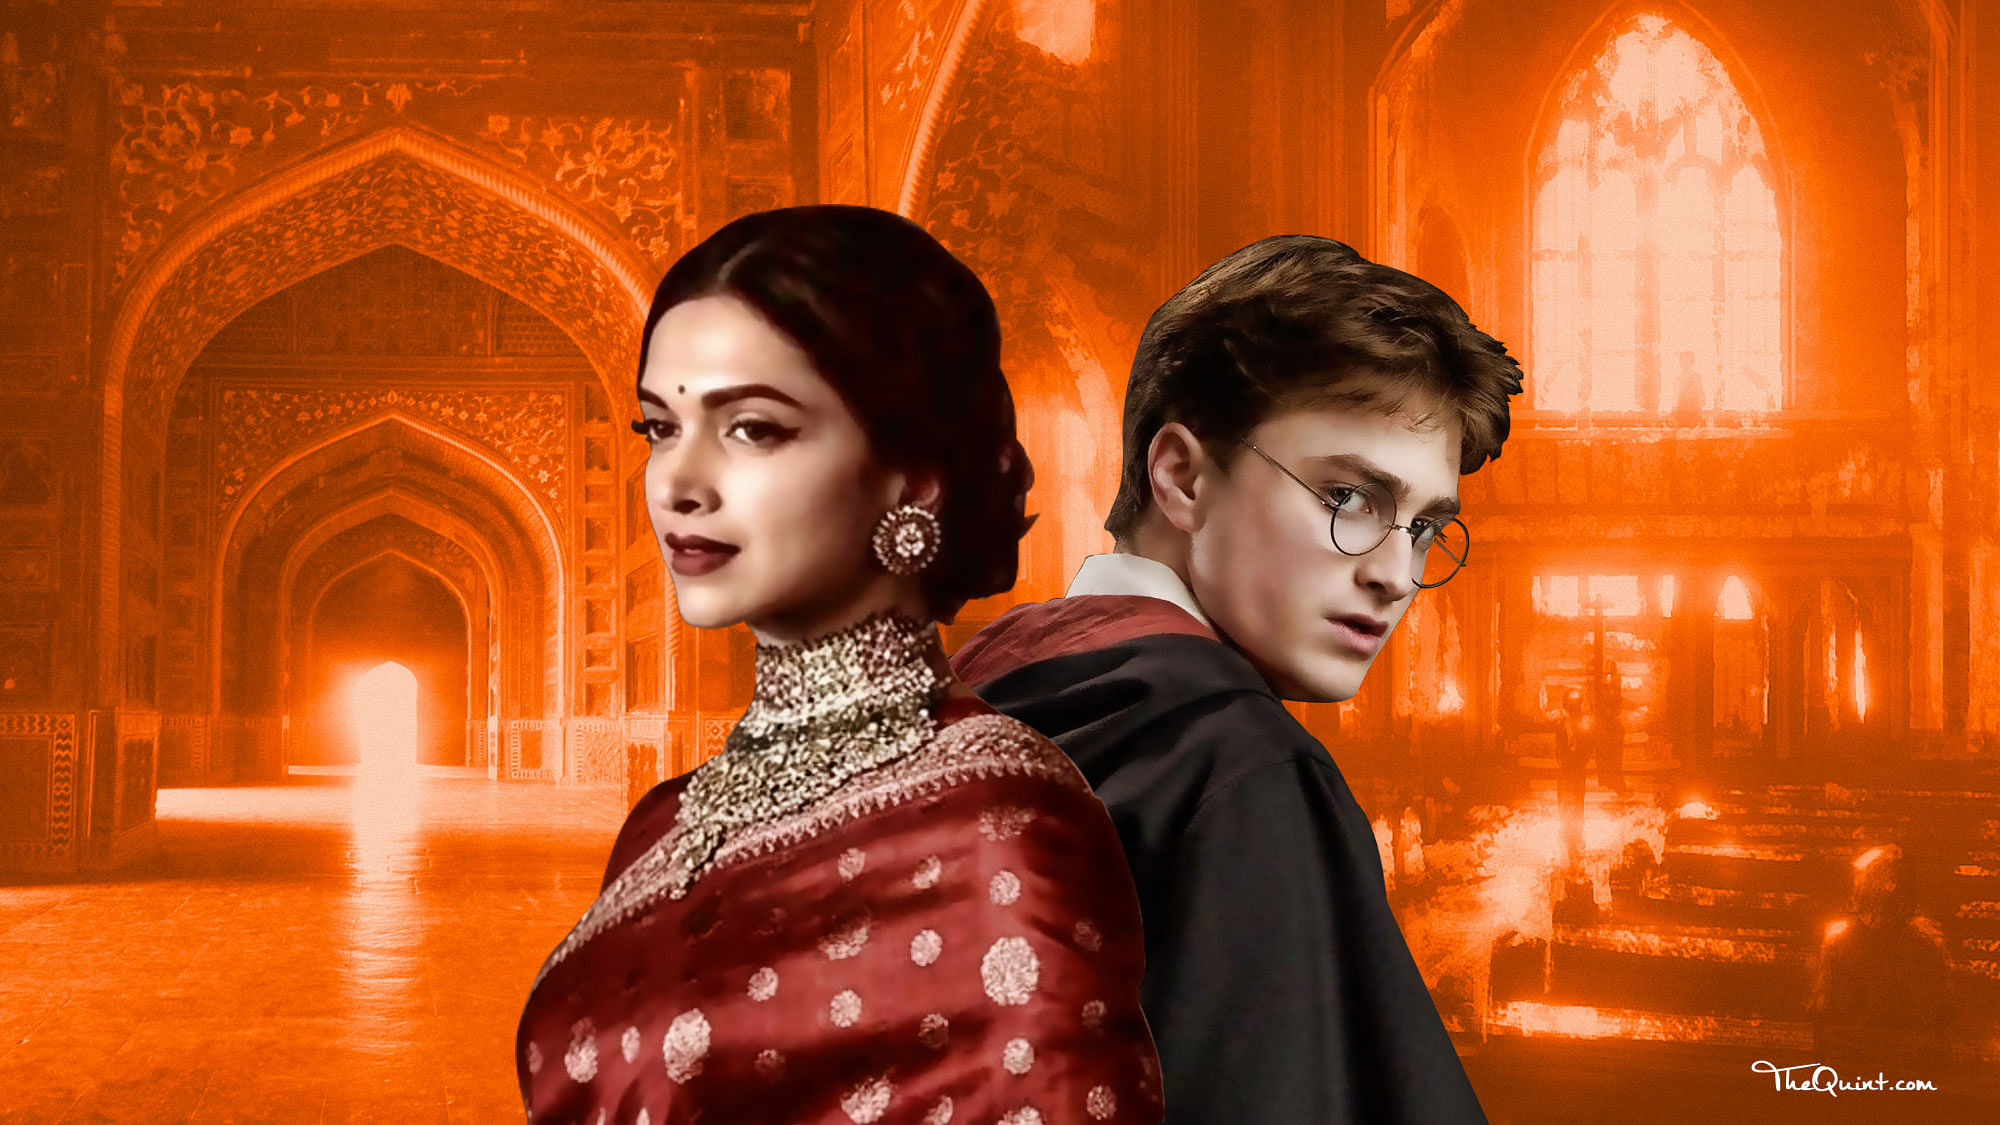 In 2017, a creative interpretation of a fictional legend can be attacked on charges of distorting history like Padmavati. So, why is it hard to imagine that seventy years down the line, Harry Potter becomes an urban legend?